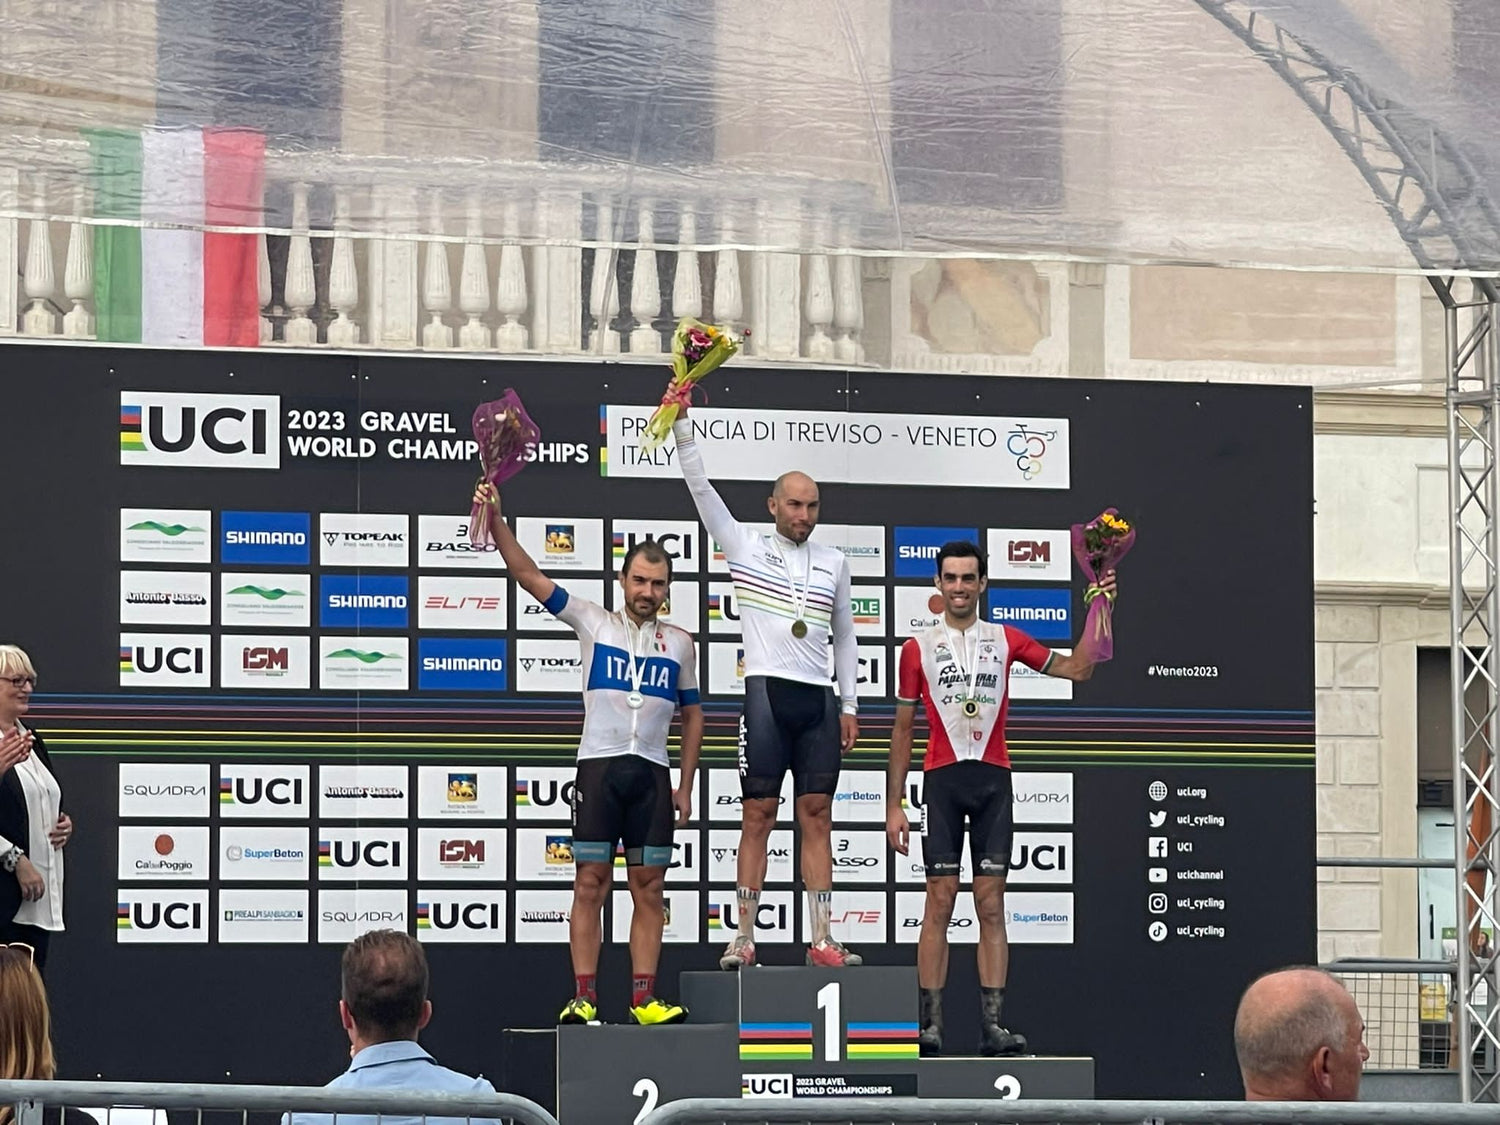 Marcello Claims Rainbow Jersey at the 2023 UCI Gravel World Championship